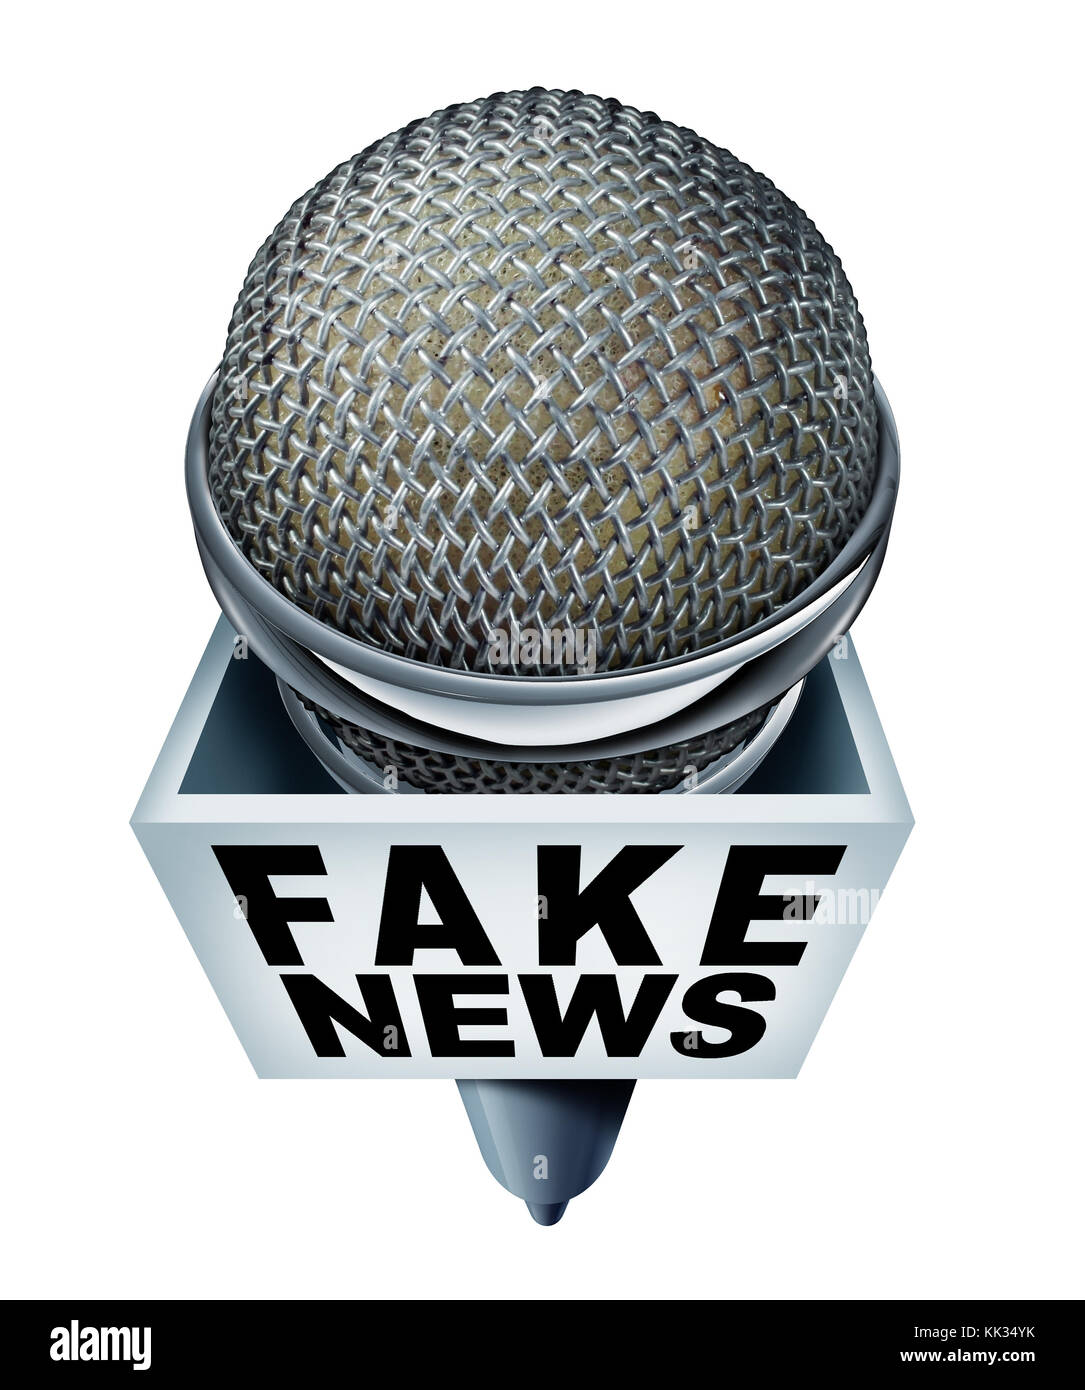 Fake news report concept and hoax journalistic reporting as a microphone with text as false media reporting metaphor and deceptive disinformation. Stock Photo